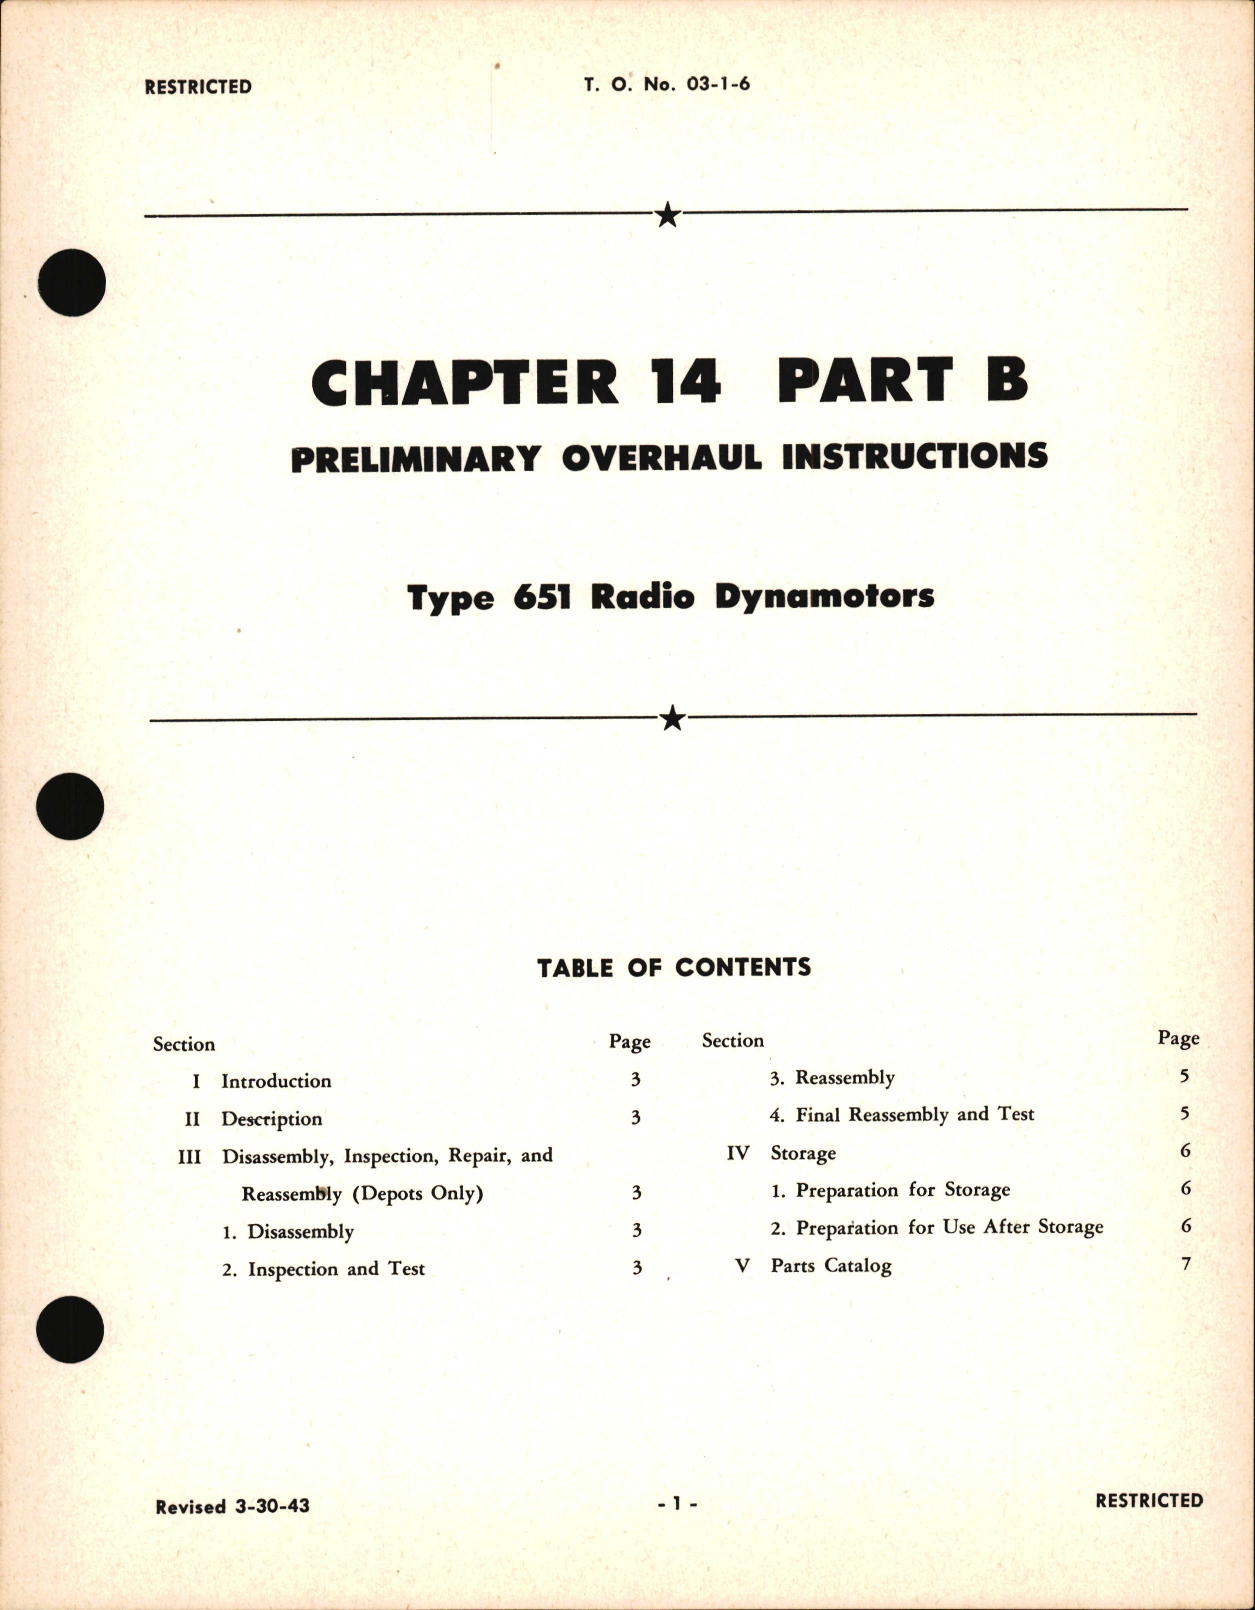 Sample page 1 from AirCorps Library document: Preliminary Overhaul Instructions for Type 651 Radio Dynamotors